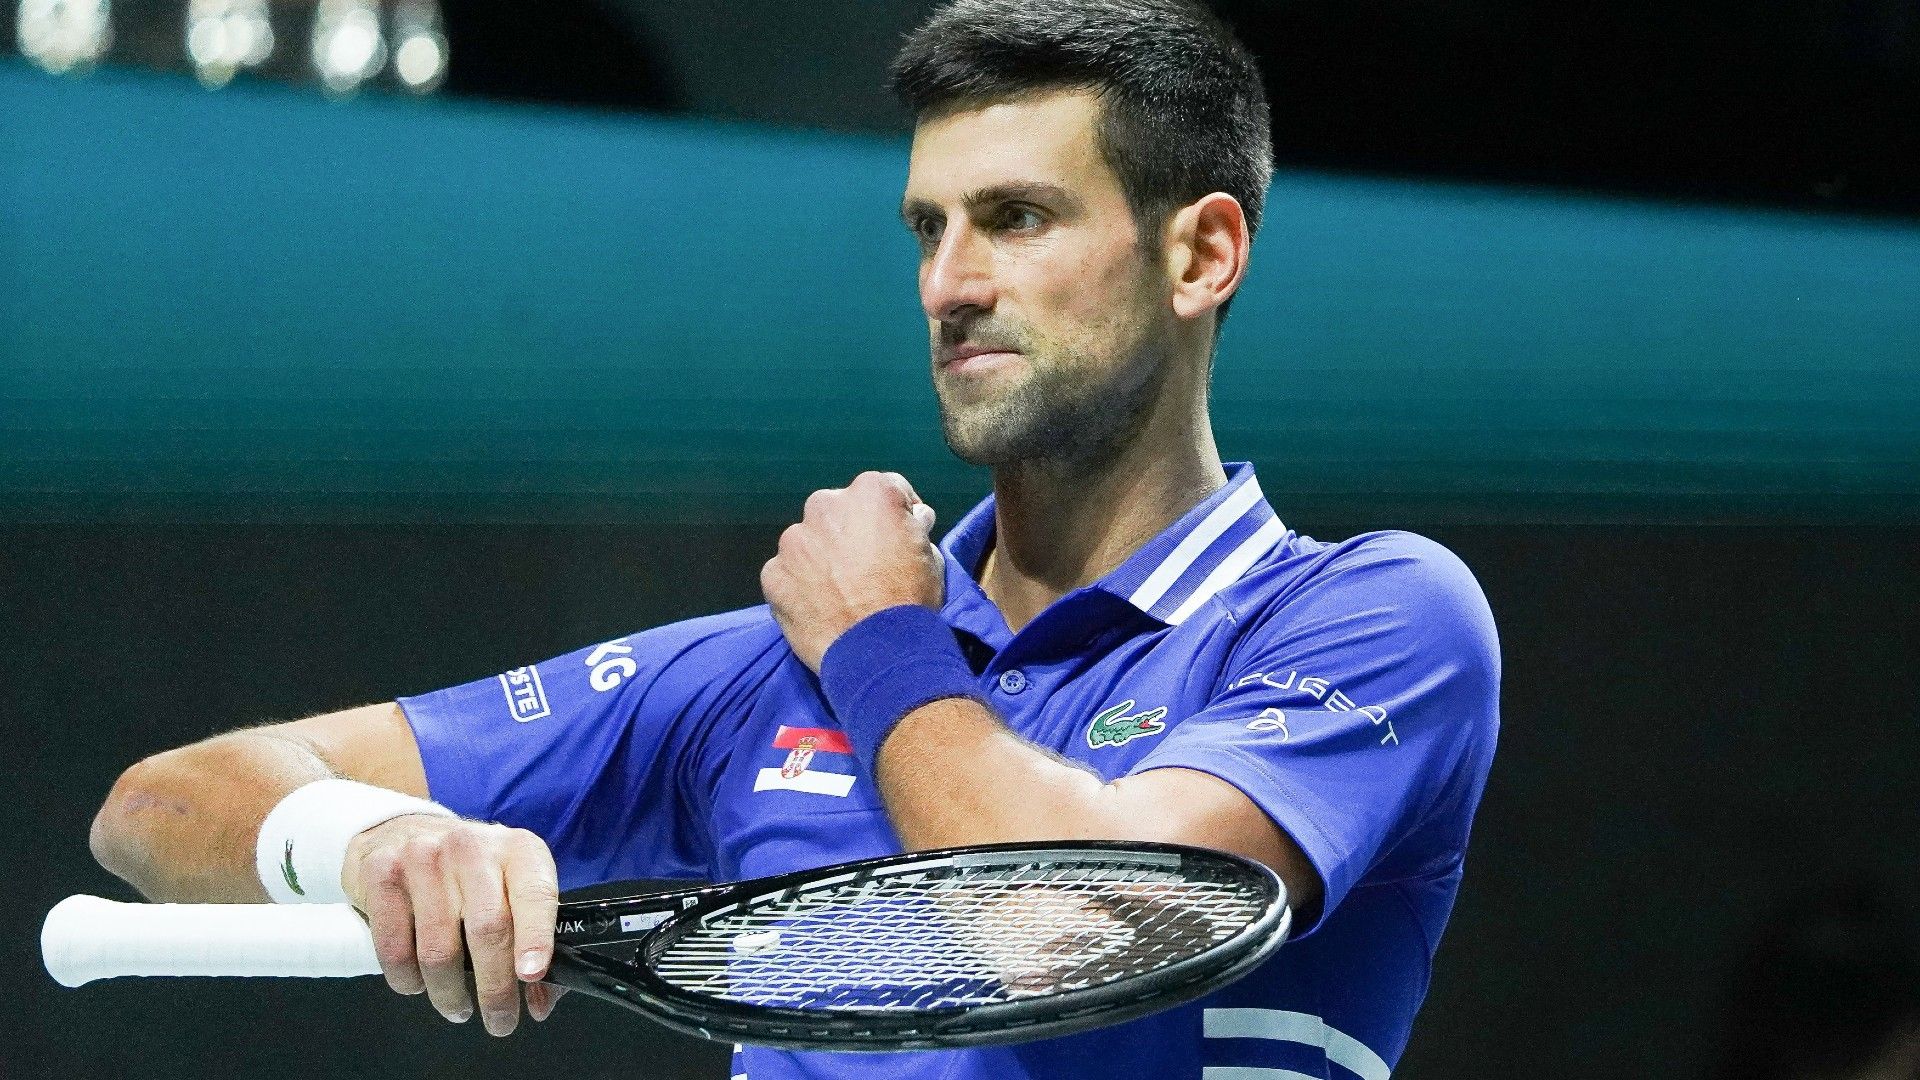 Cloud remains over Novak as stars prep for Open